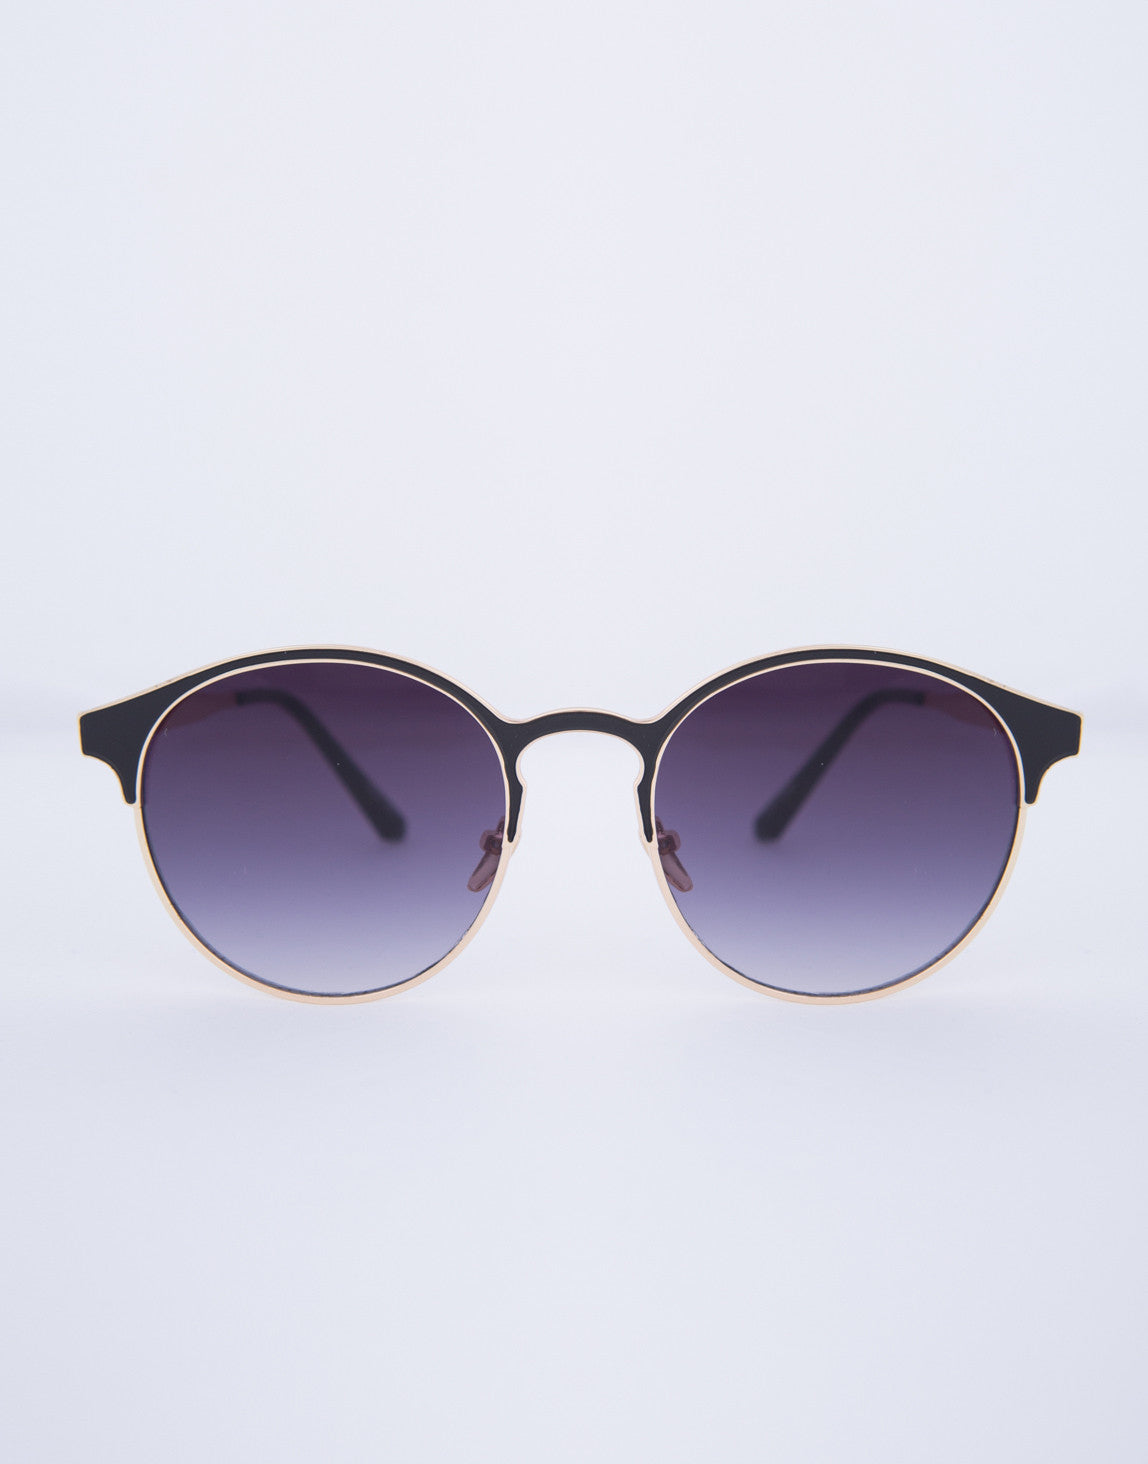 Round About Sunnies - Flat Framed Sunglasses - Round Aviators – 2020AVE